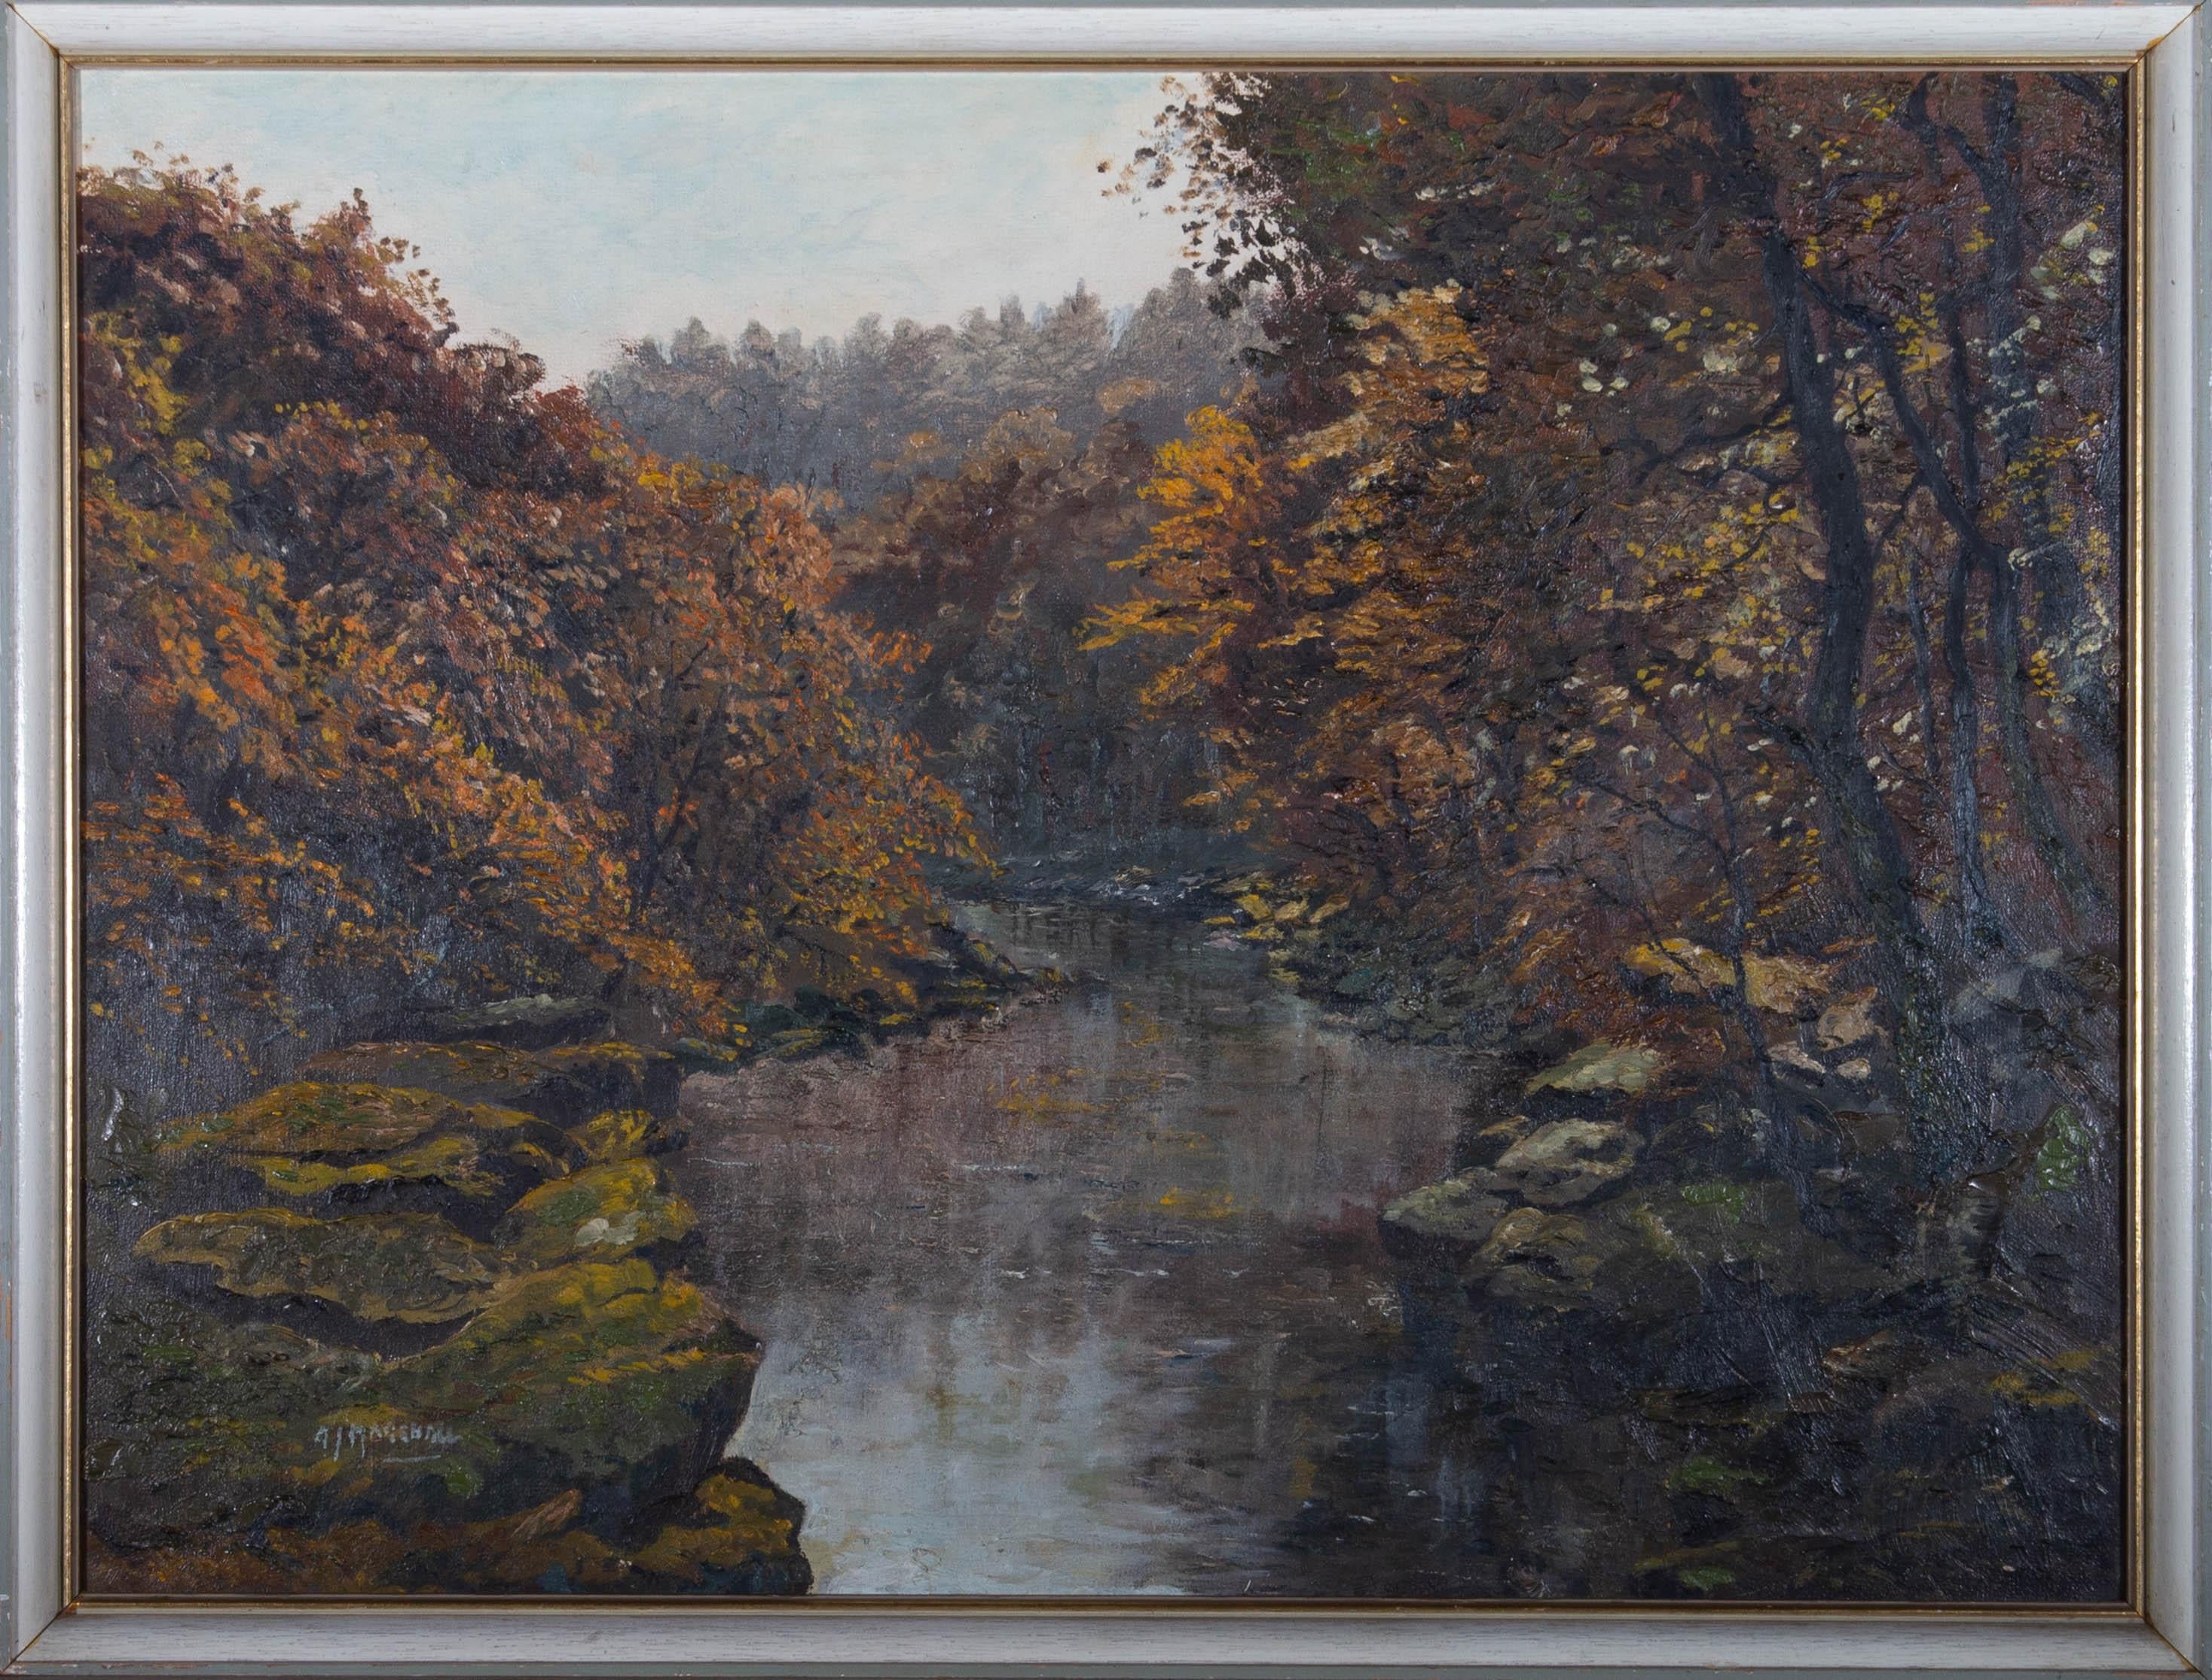 Unknown Landscape Painting - 20th Century Oil - Bolton Woods